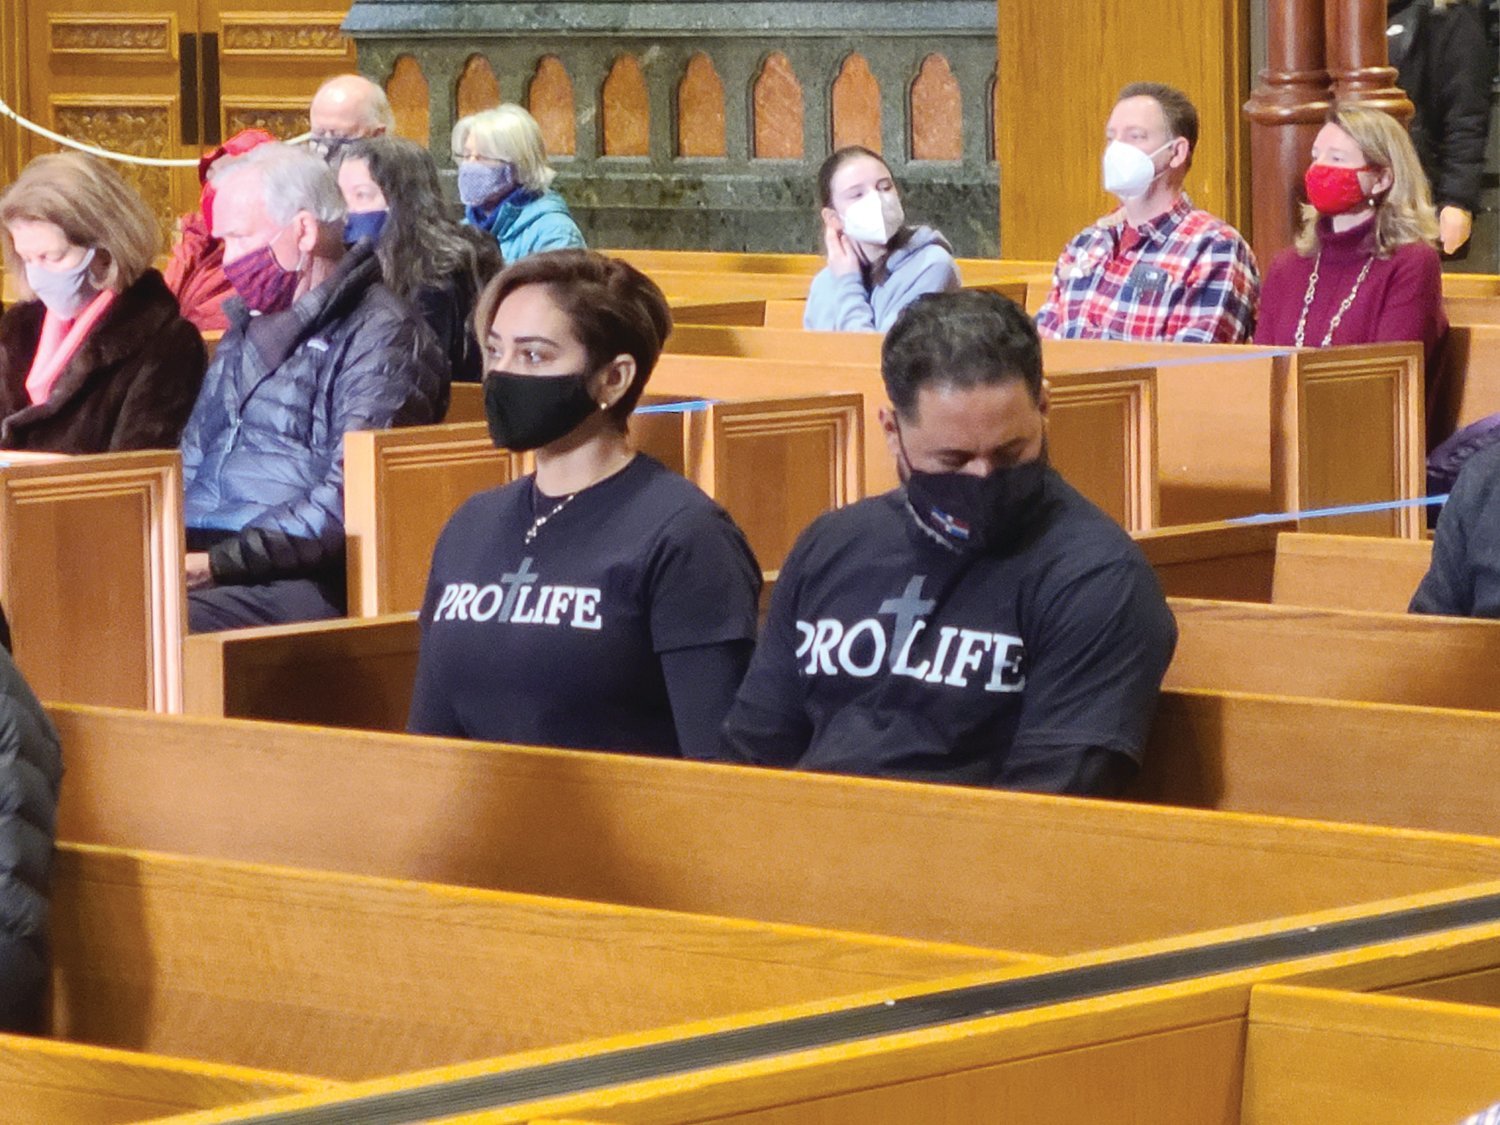 Juan Luzon and his wife Iris Luzo, parishioners of St. Charles Borromeo Church in Providence, look on during the Respect Life Mass.